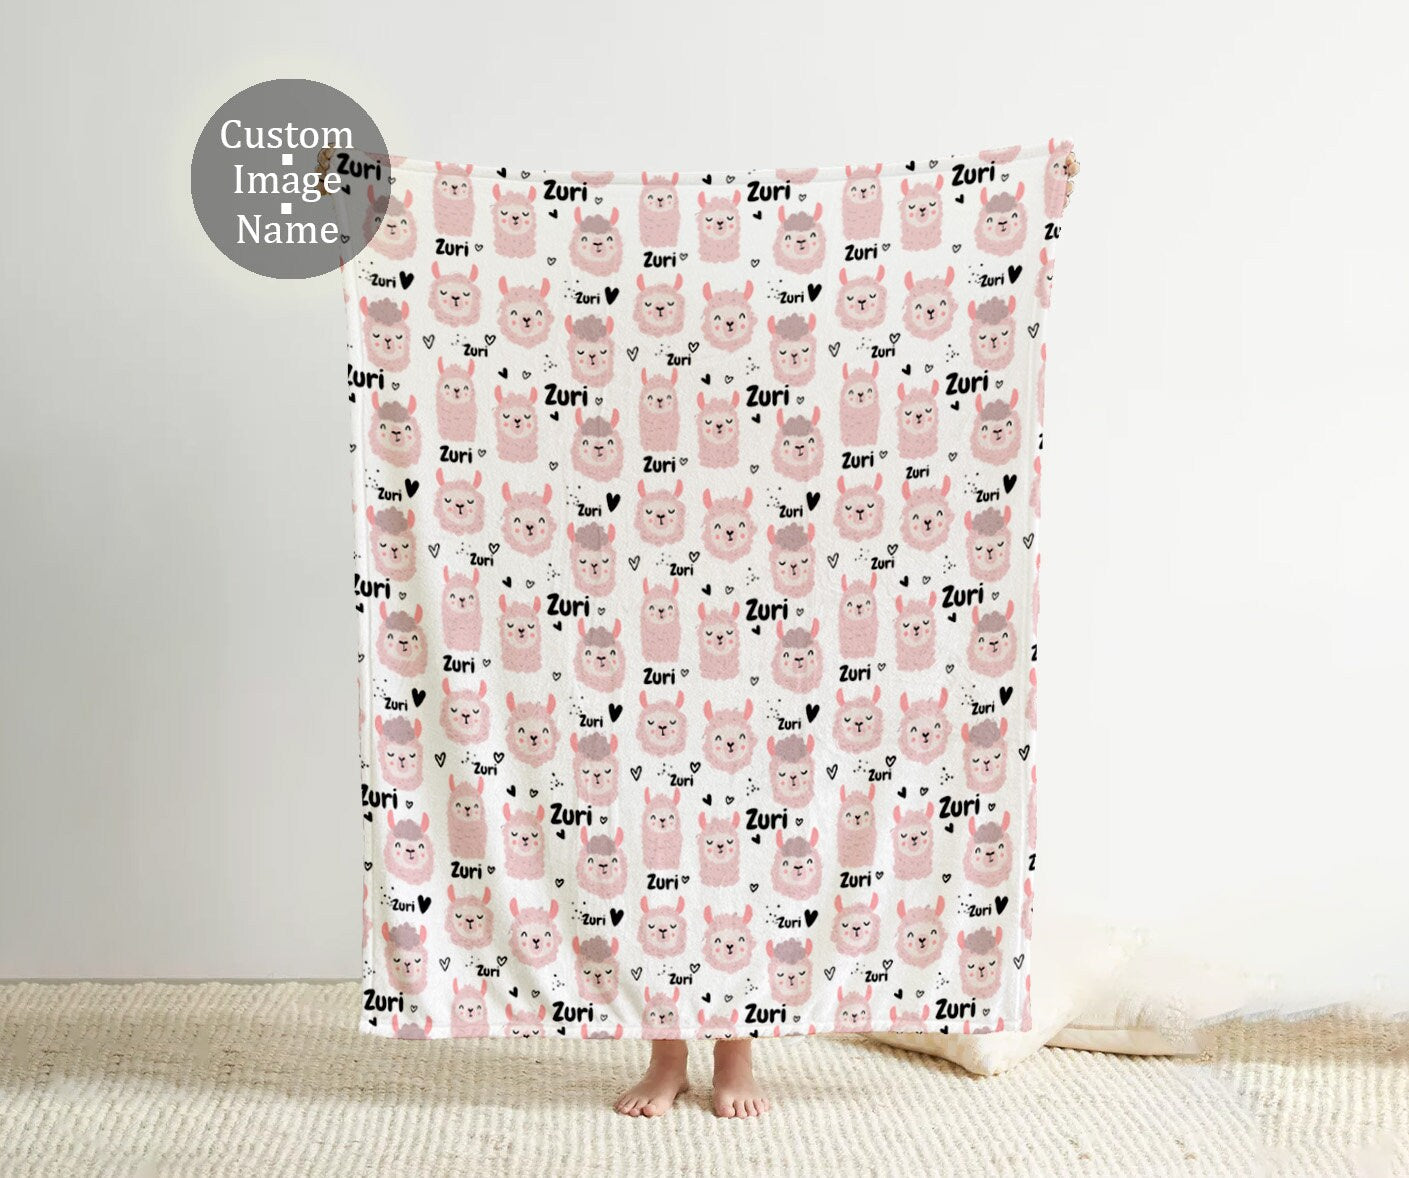 Personalized Hand-Drawn Llama Design blanket with Name, Cute lamas and hearts, Custom blanket gift, Birthday baby shower gift